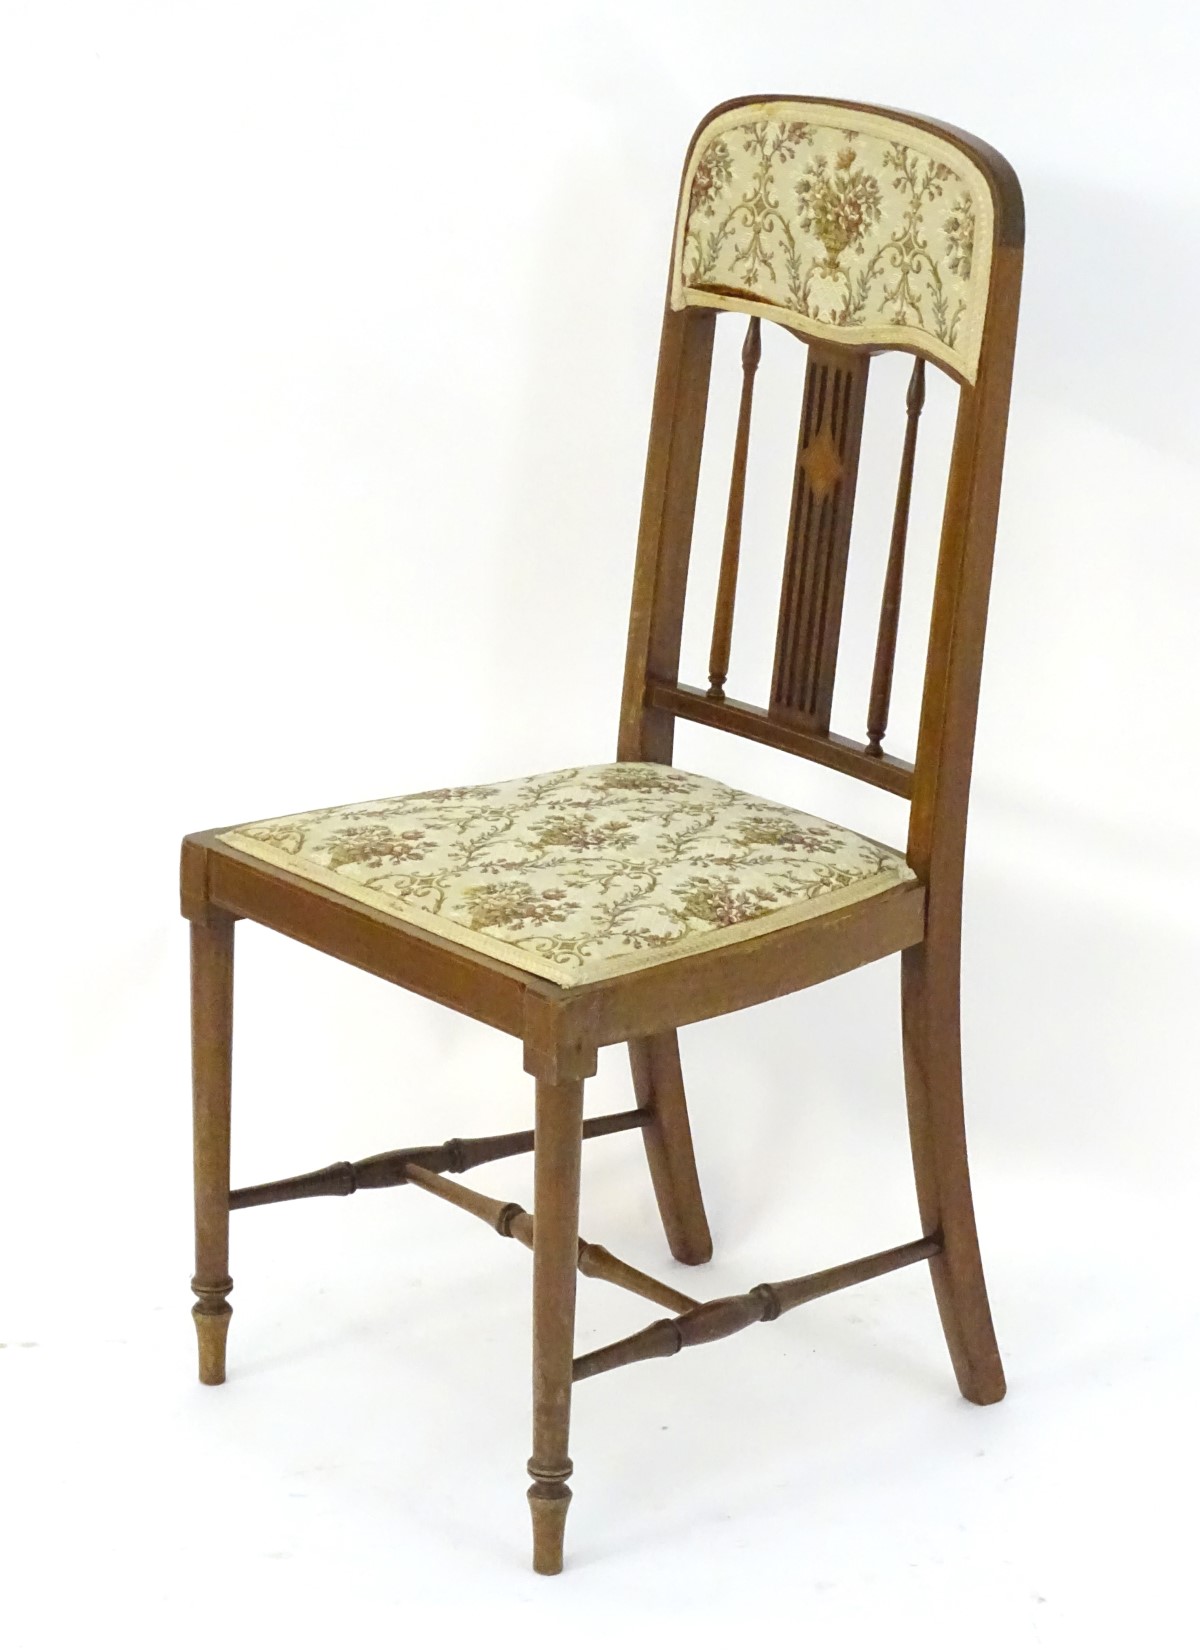 An early 20thC mahogany bedroom chair with a slatted backrest and inlaid decoration, - Image 4 of 9